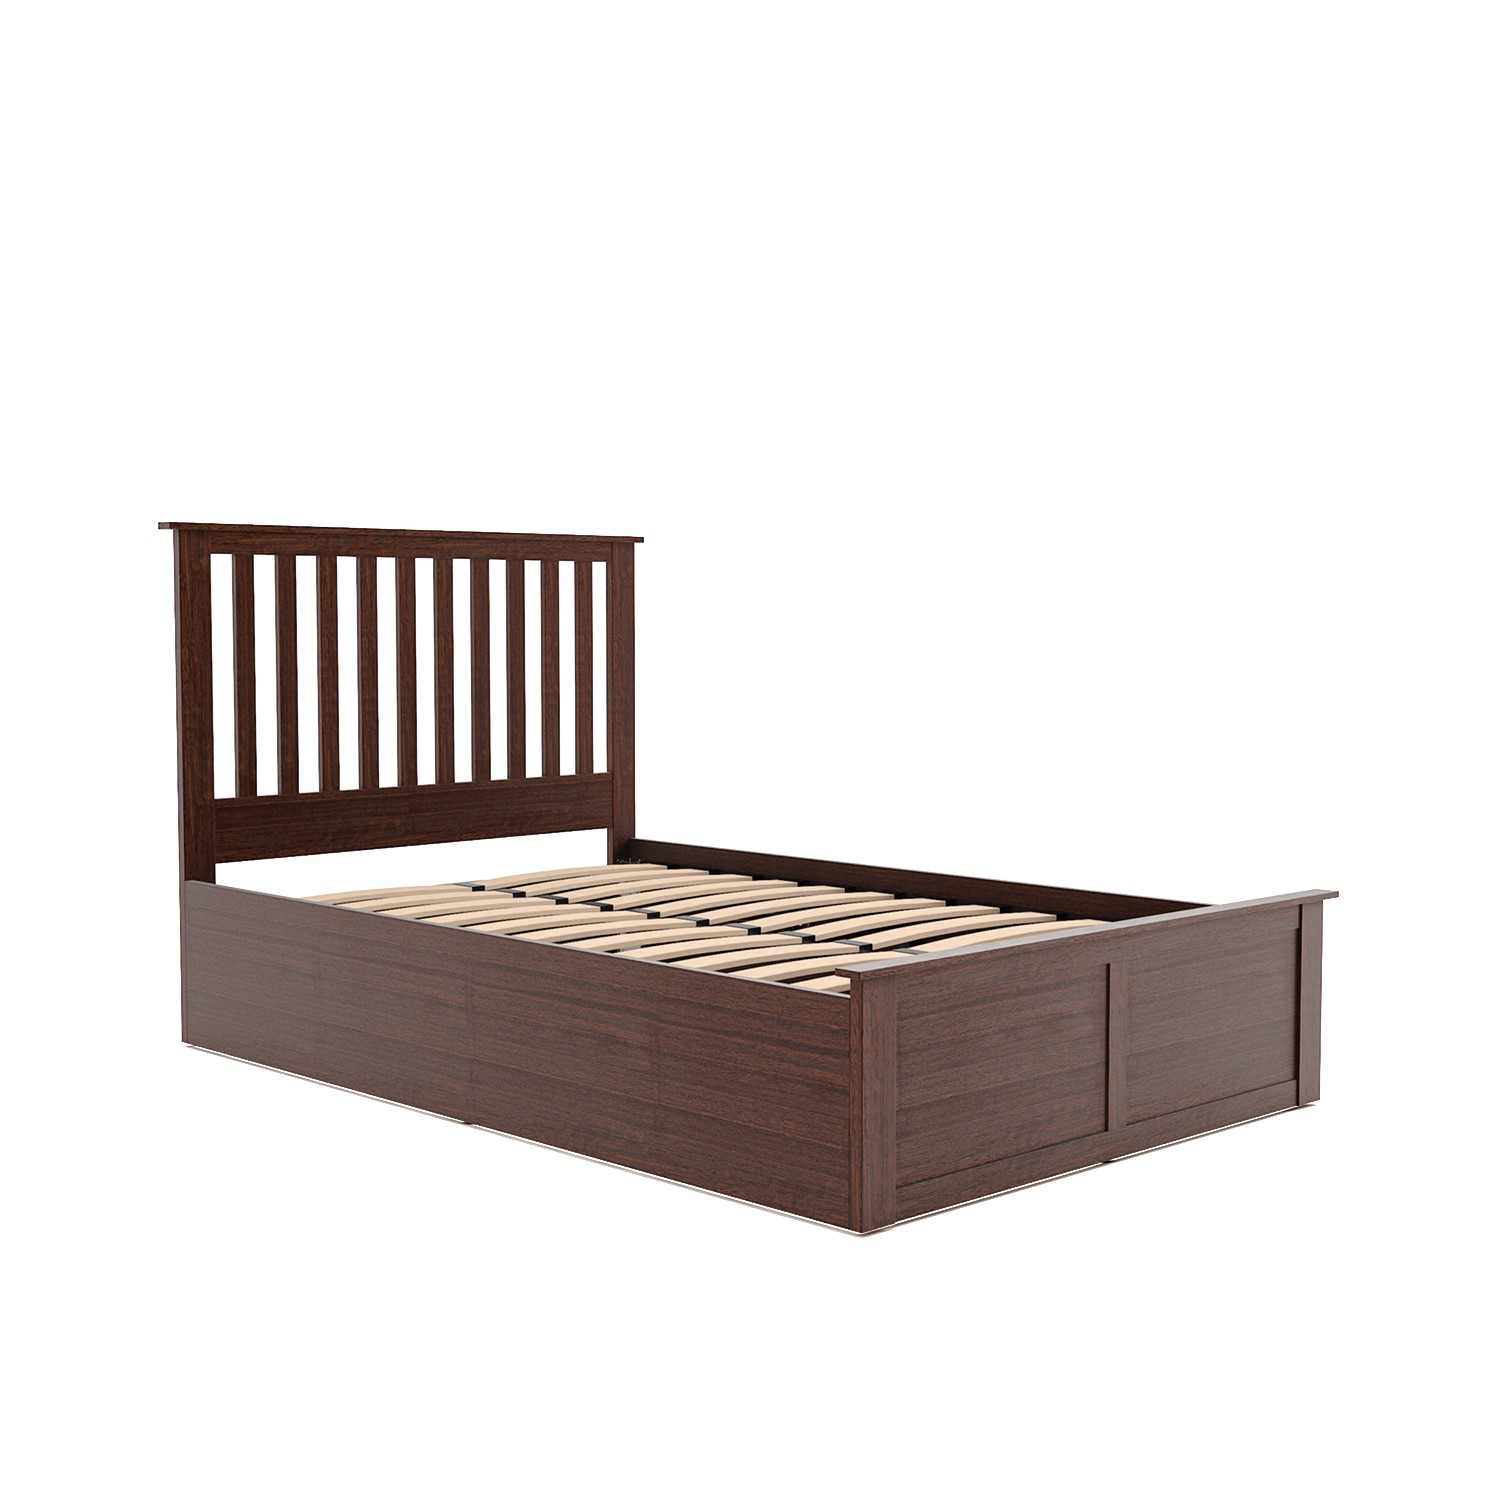 Walnut Wooden Double Ottoman Bed - Anderson - Furniture123